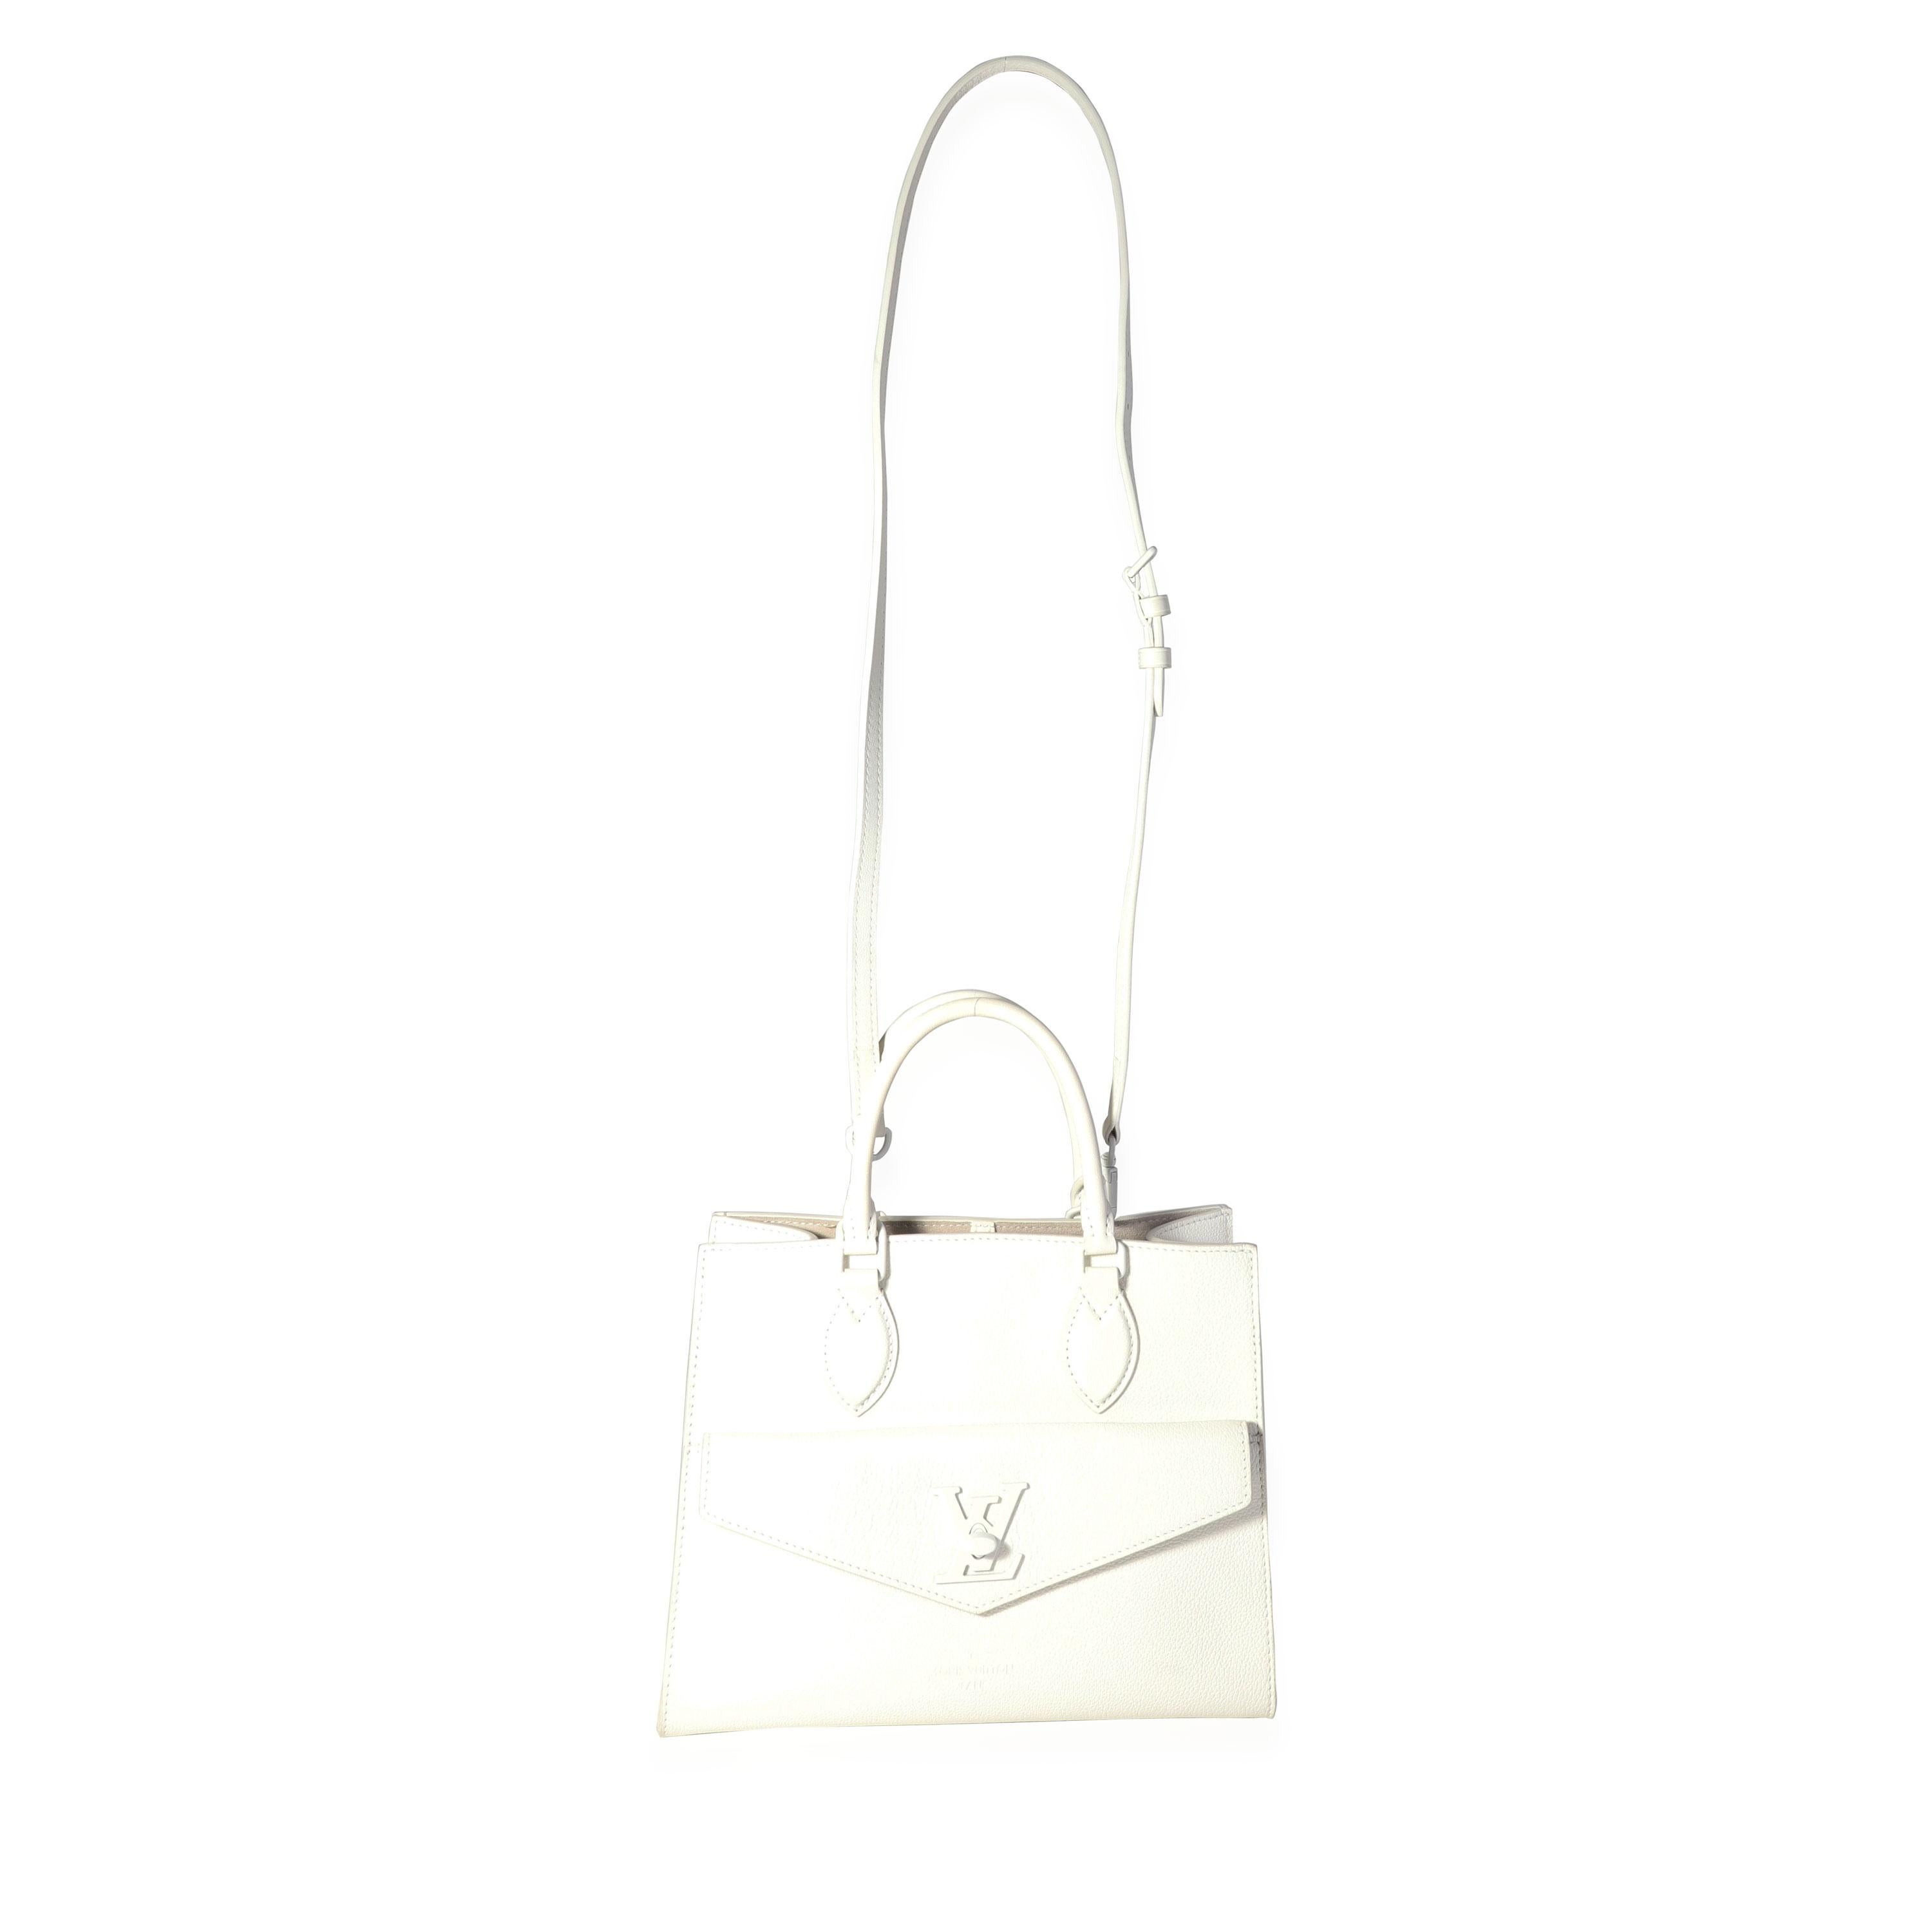 Listing Title: Louis Vuitton White Leather Monochrome Lockme Tote PM
SKU: 118430
MSRP: 3400.00
Condition: Pre-owned (3000)
Handbag Condition: Excellent
Condition Comments: Excellent Condition. Faint wear to corners. No other visible signs of